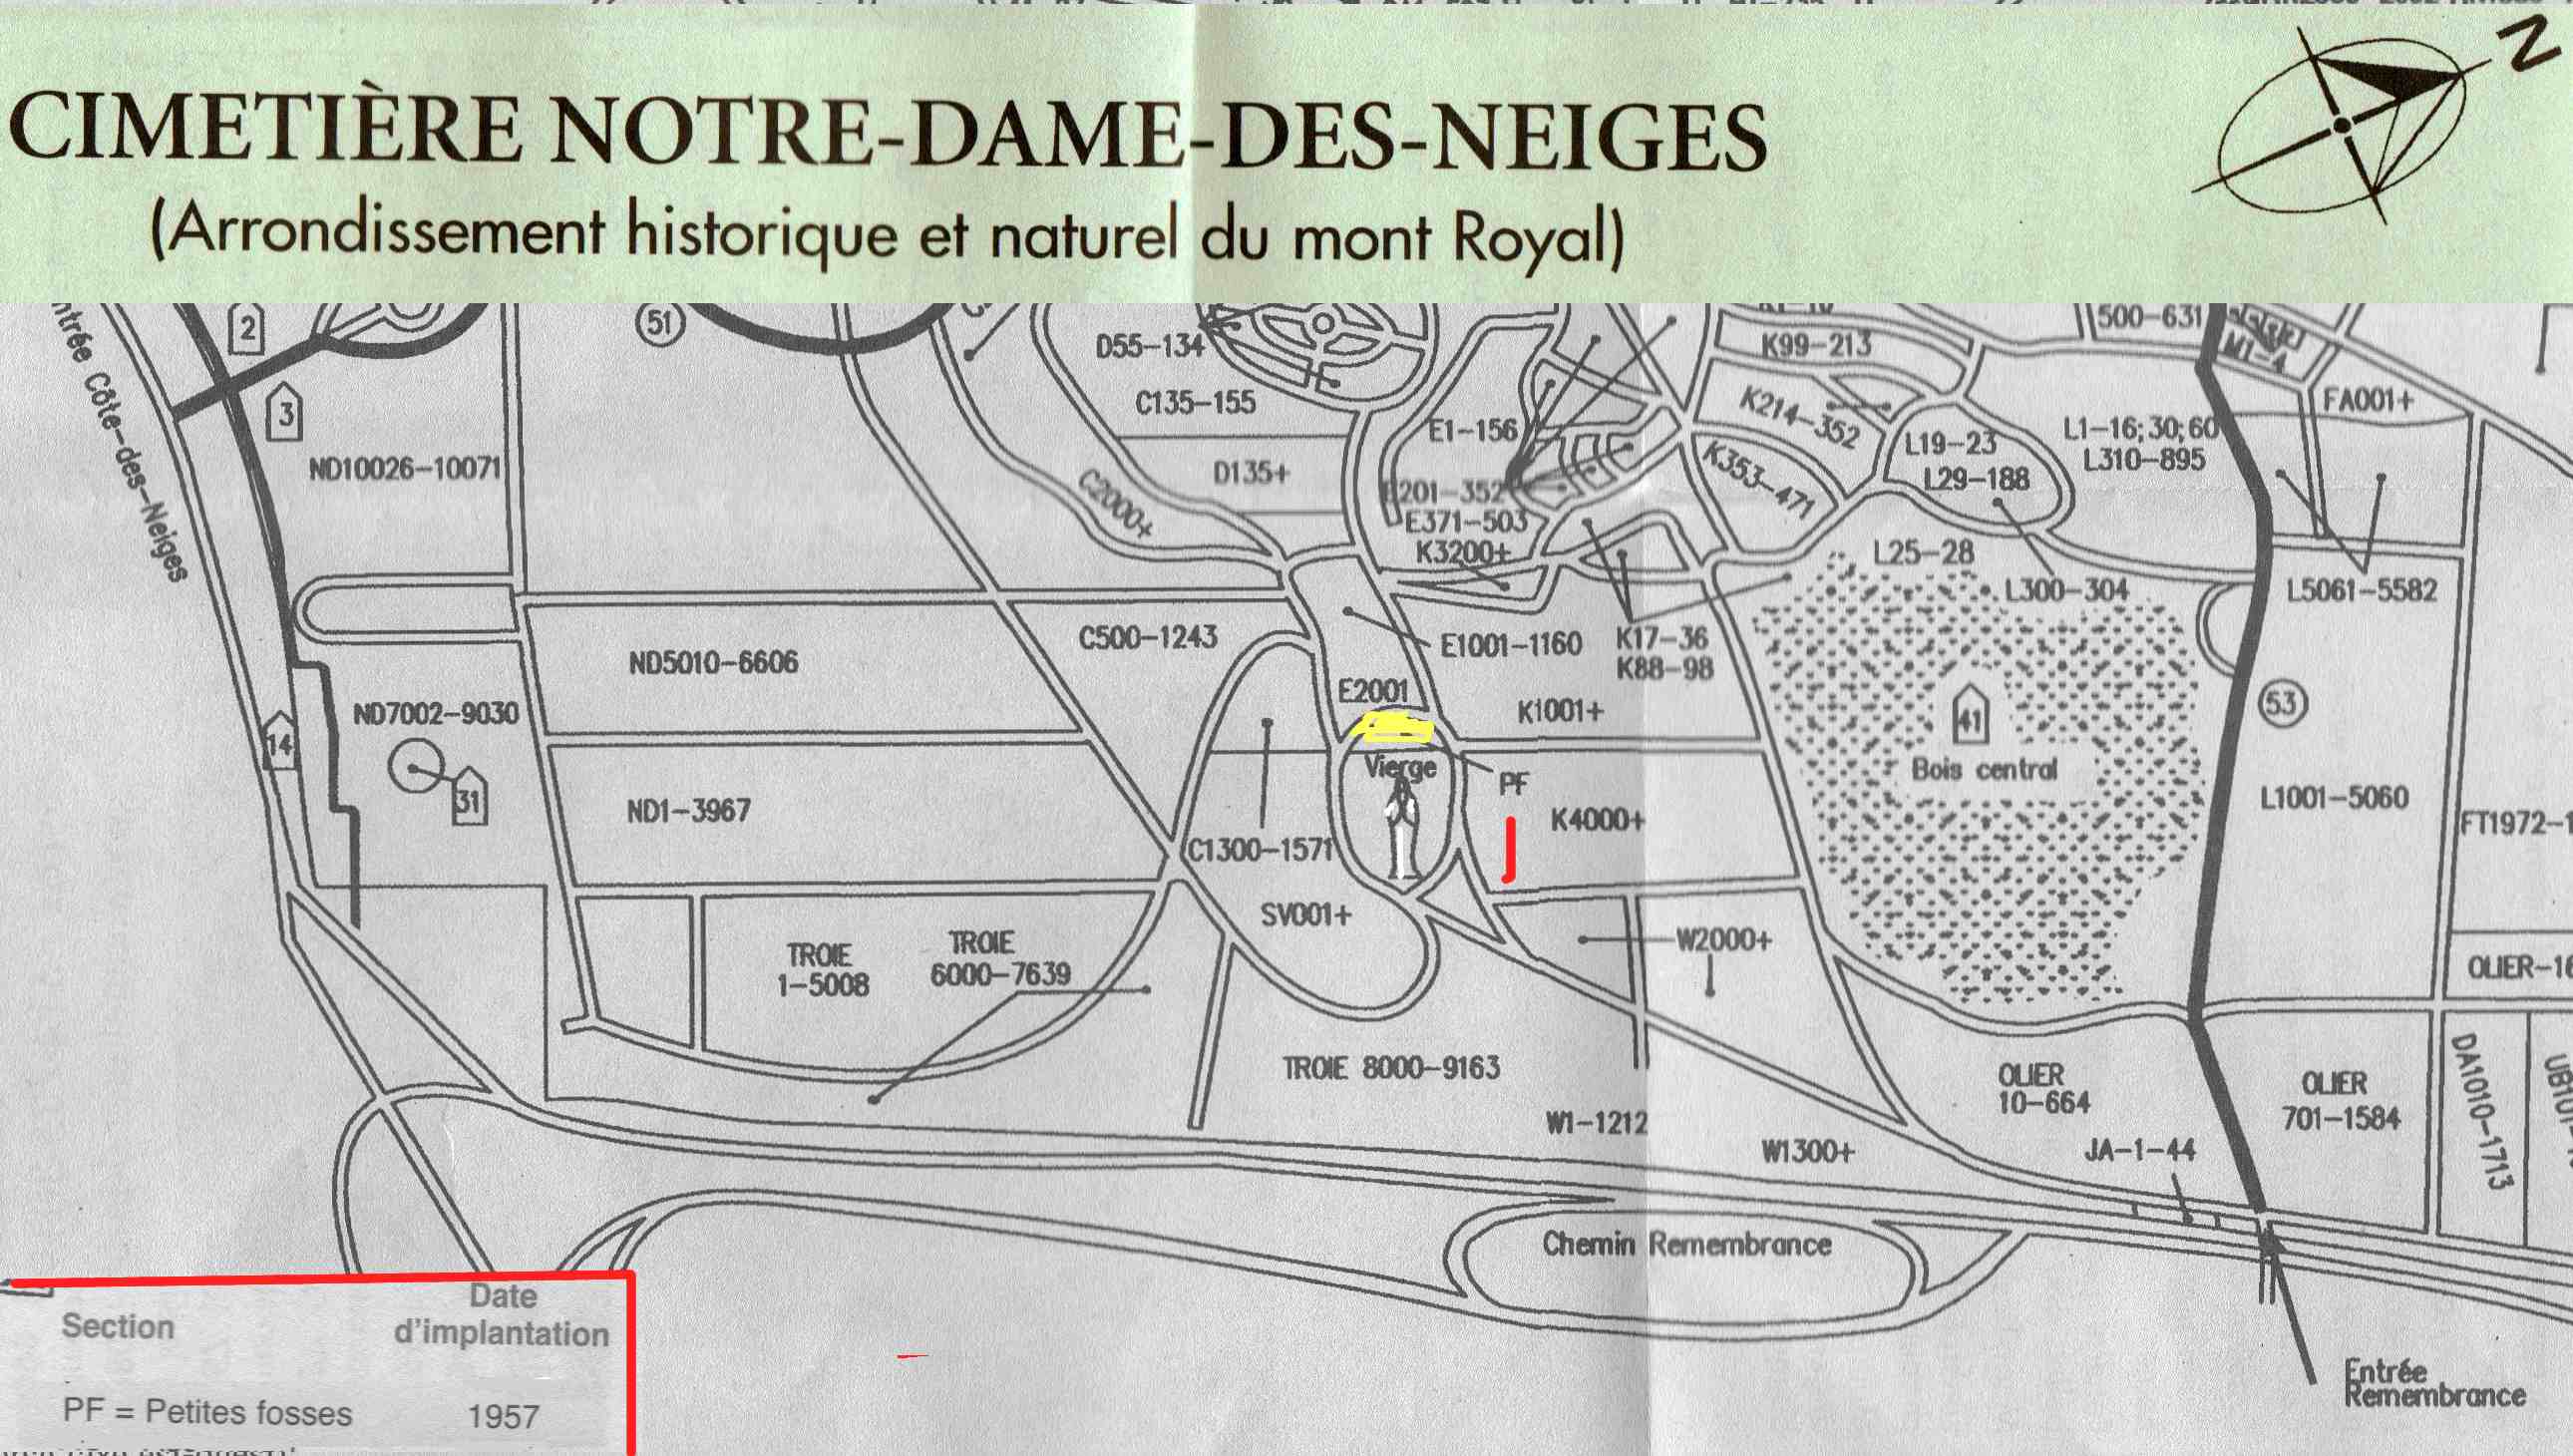  Partial Map of Notre-Dame-des-Neiges Cemetery Showing Area PF Reserved For Small Children  